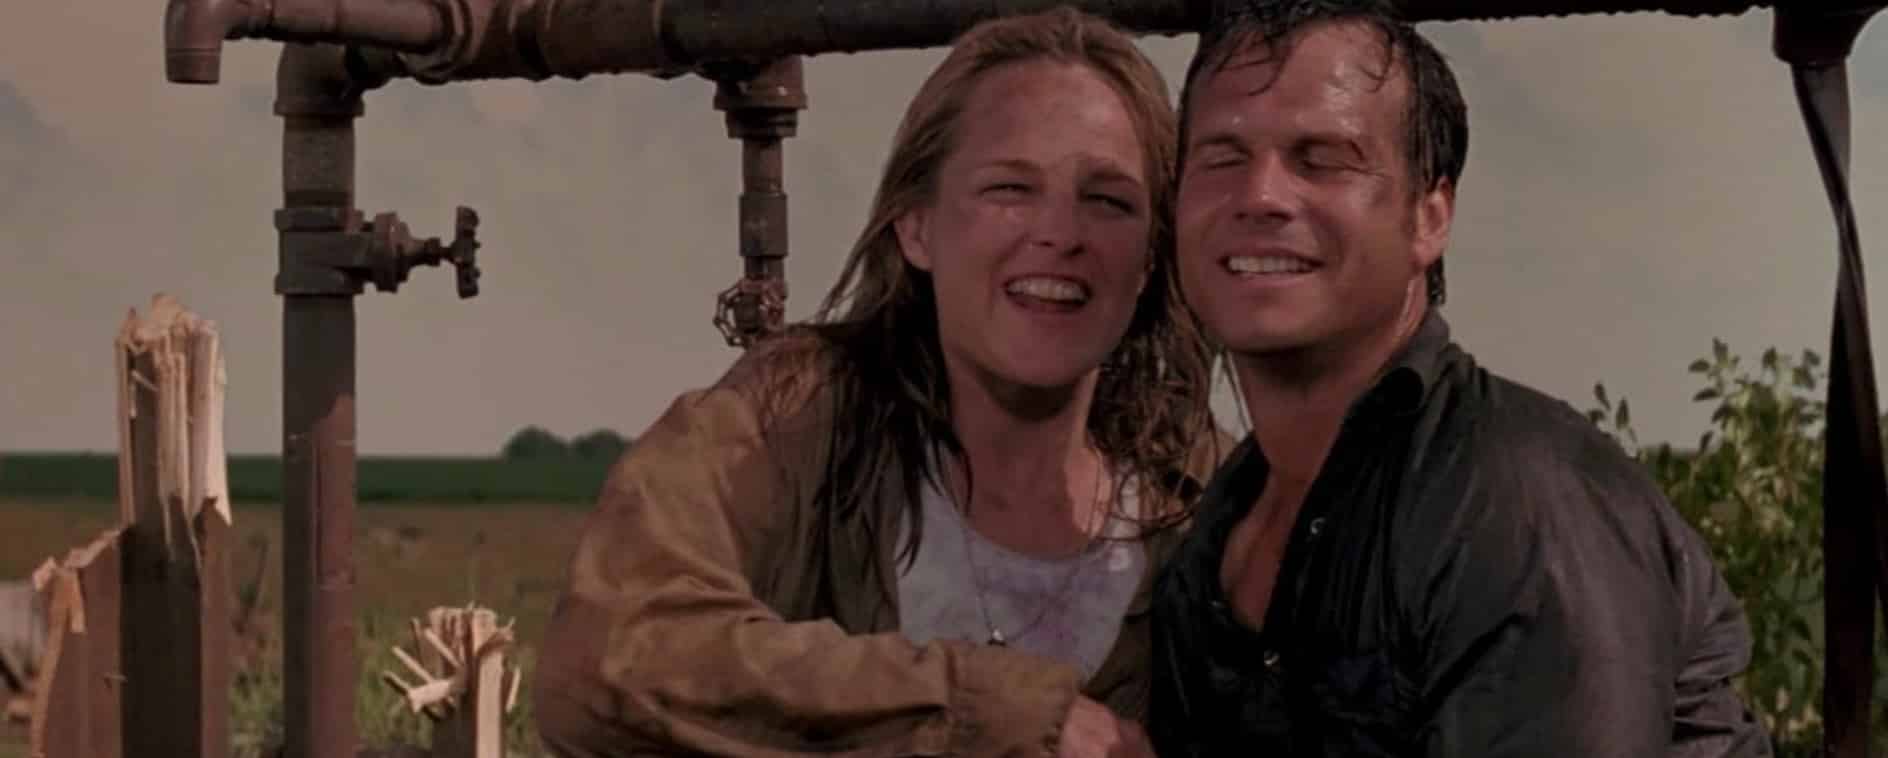 Helen Hunt and Bill Paxton in Twister (1996)